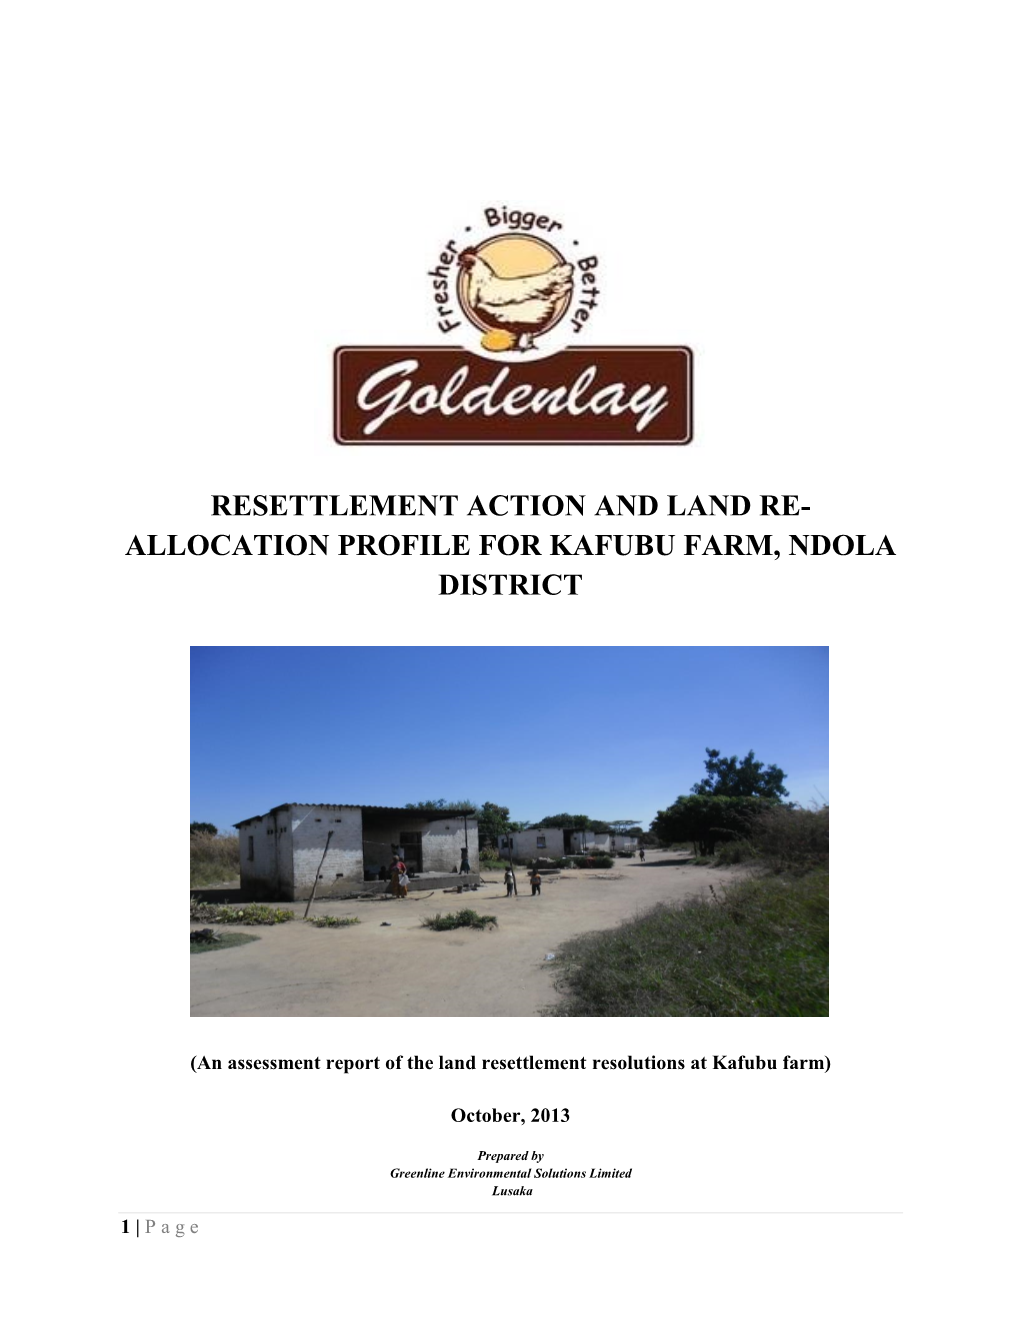 A. Resettlement Action and Land Reallocation Profile for Kafubu